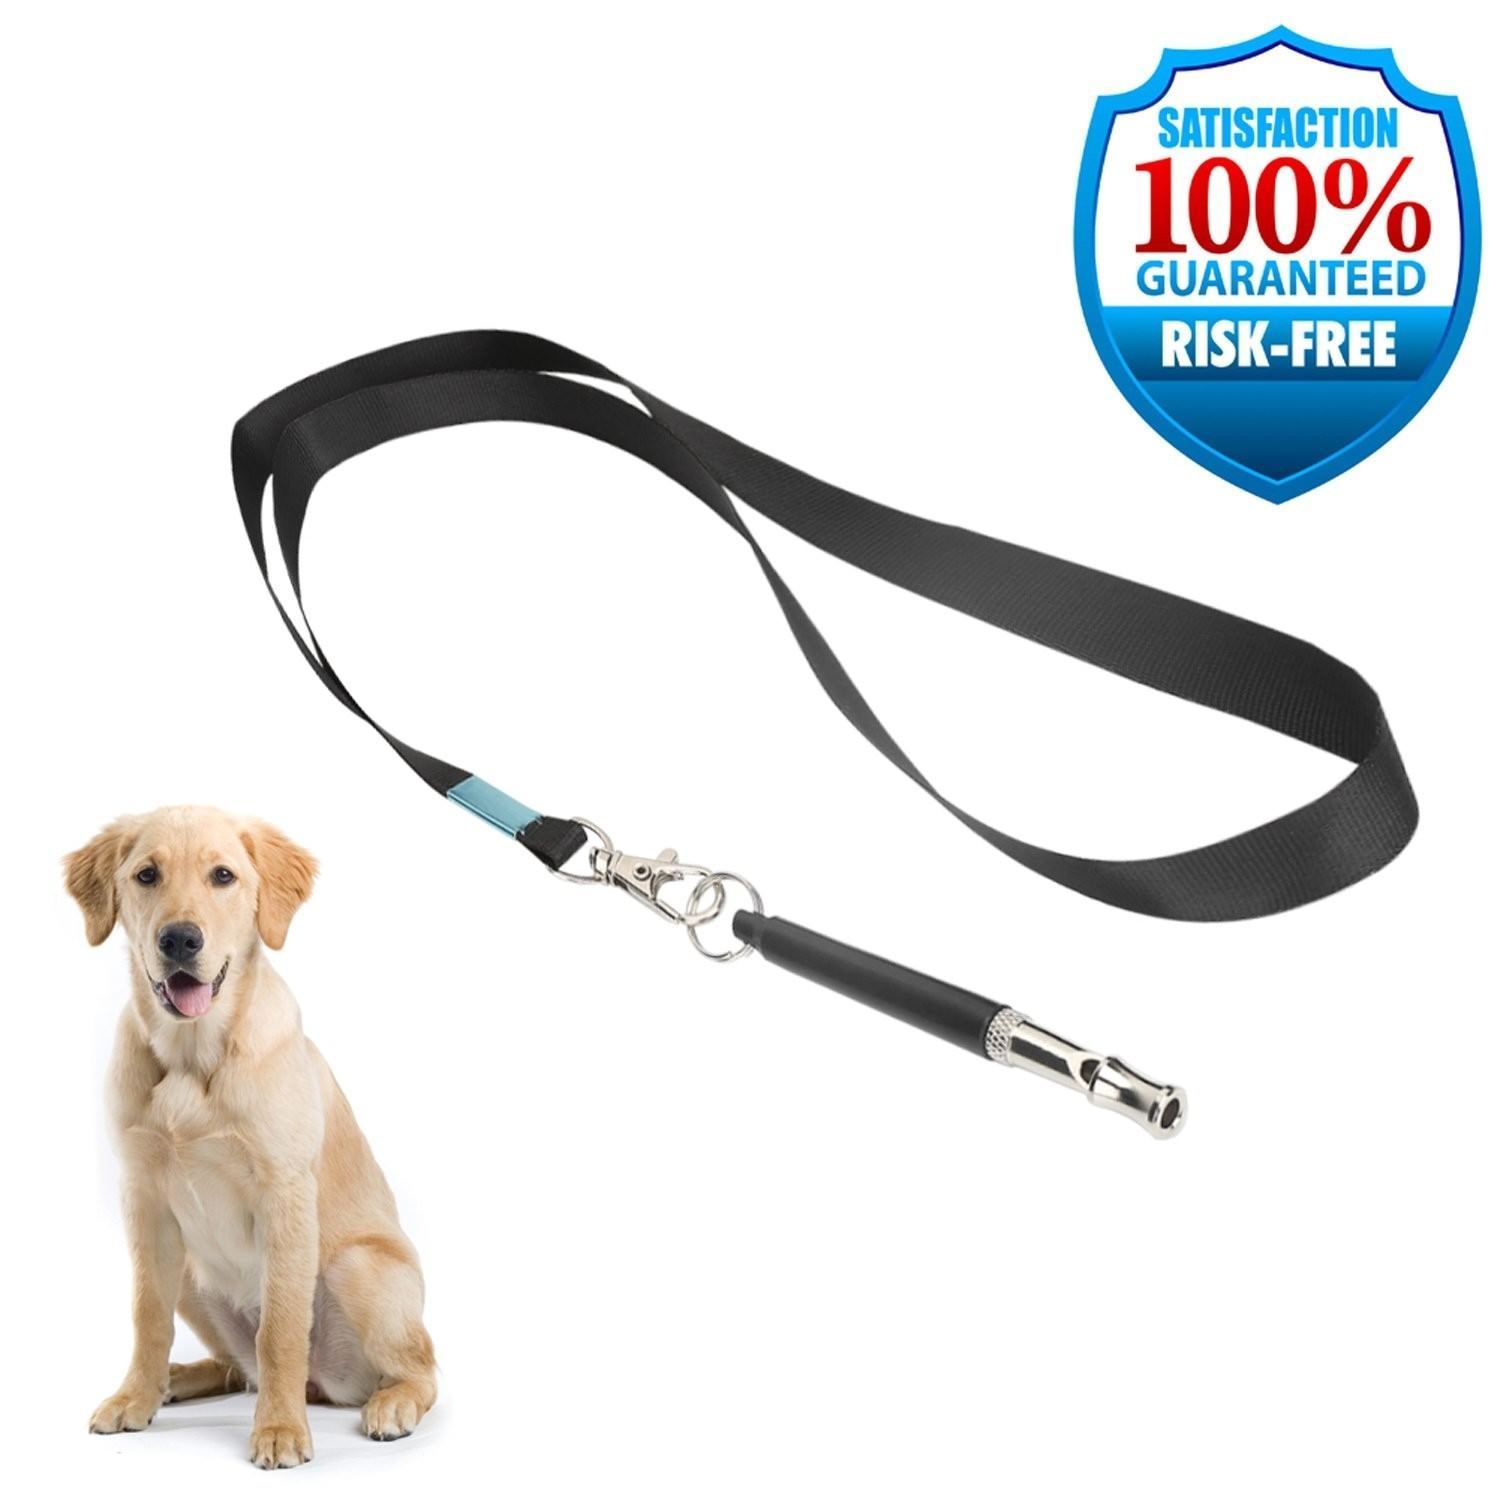 Gamloious 1s Pet Dog Cat Training Obedience Whistle Ultrasonic Supersonic Sound Pitch Quiet Trainning Whistles Pets Supplies